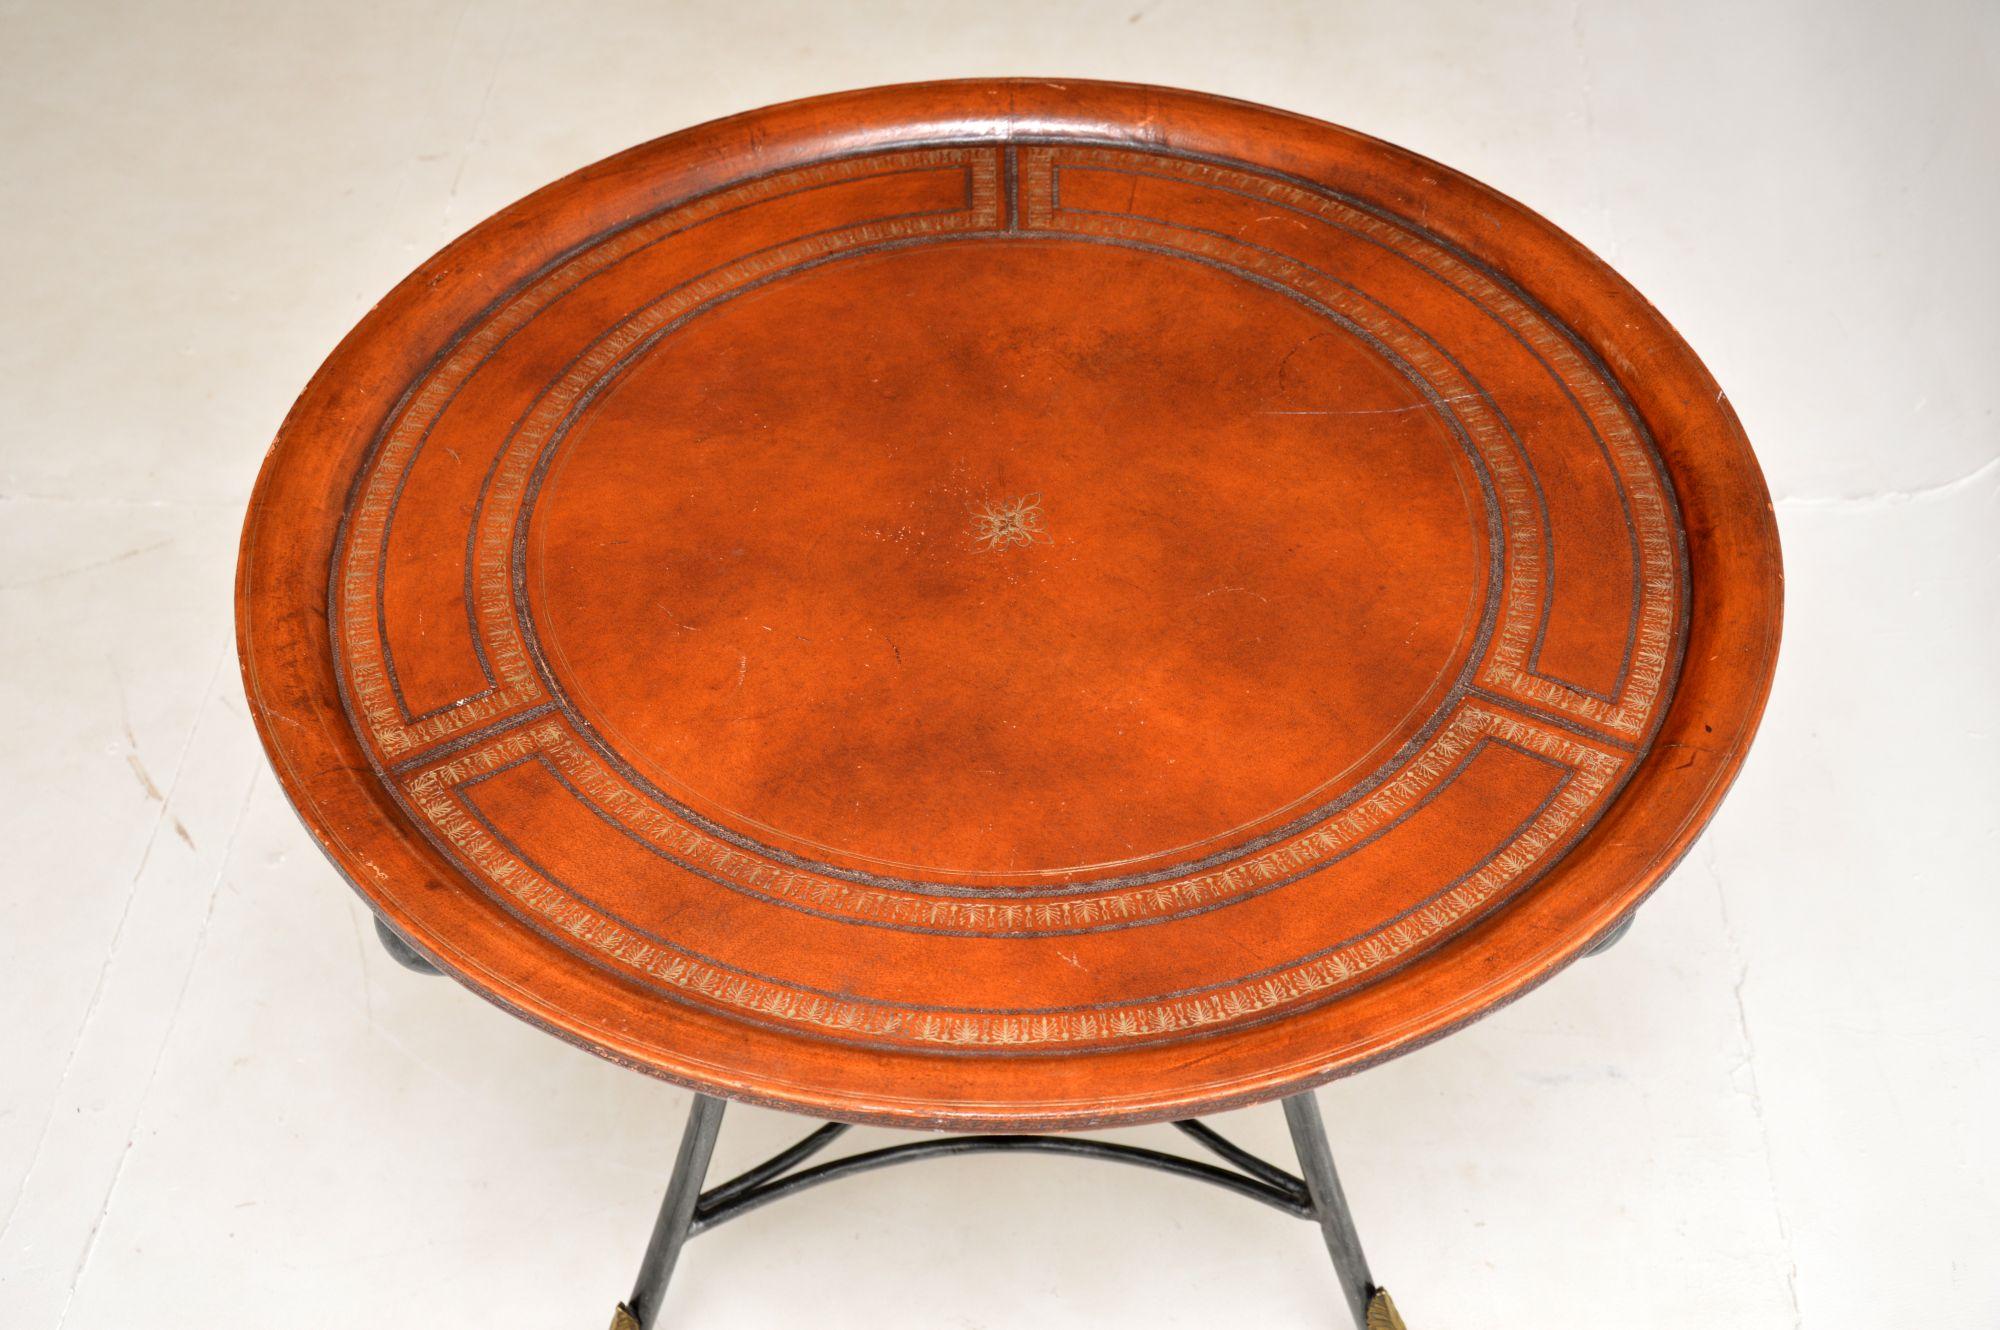 Neoclassical Antique Leather Top Geridon Table